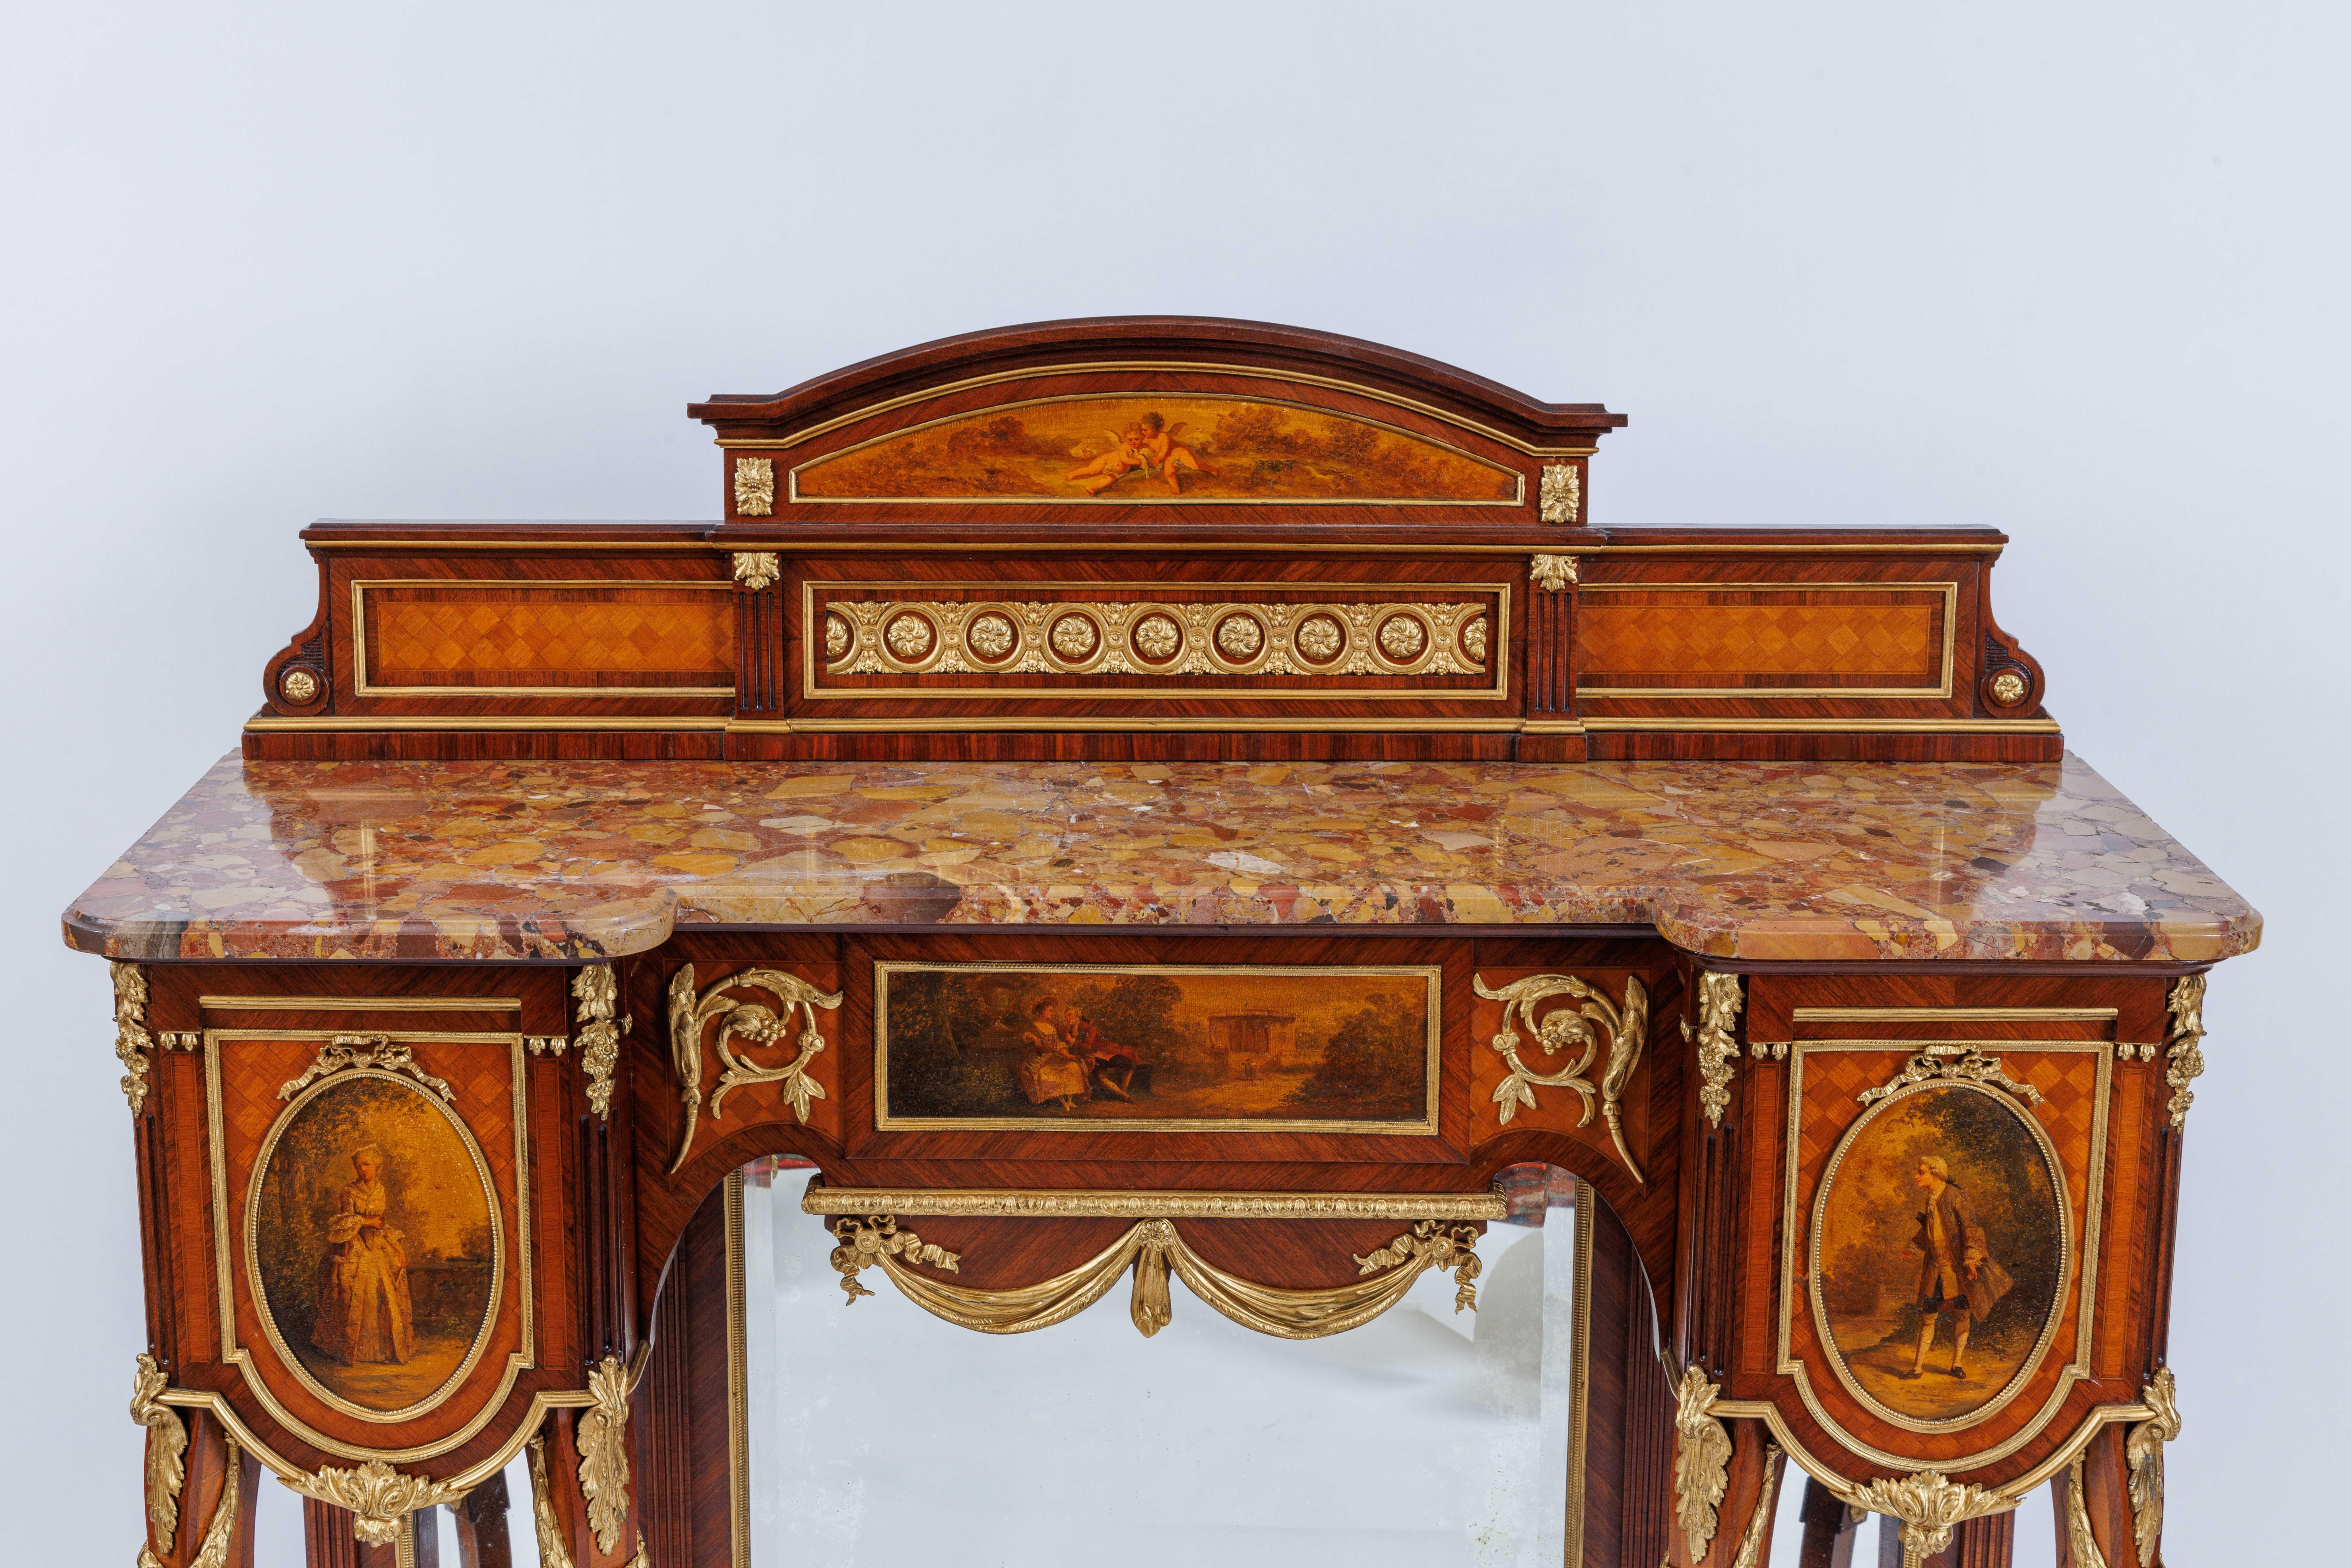 A French Ormolu-Mounted Kingwood and Vernis Martin Marble Top Console Table / Buffet, circa 1880, attributed to Henry Dasson.

Crafted from rich Kingwood in the 19th century, this console table features parquetry detailing that adds a touch of